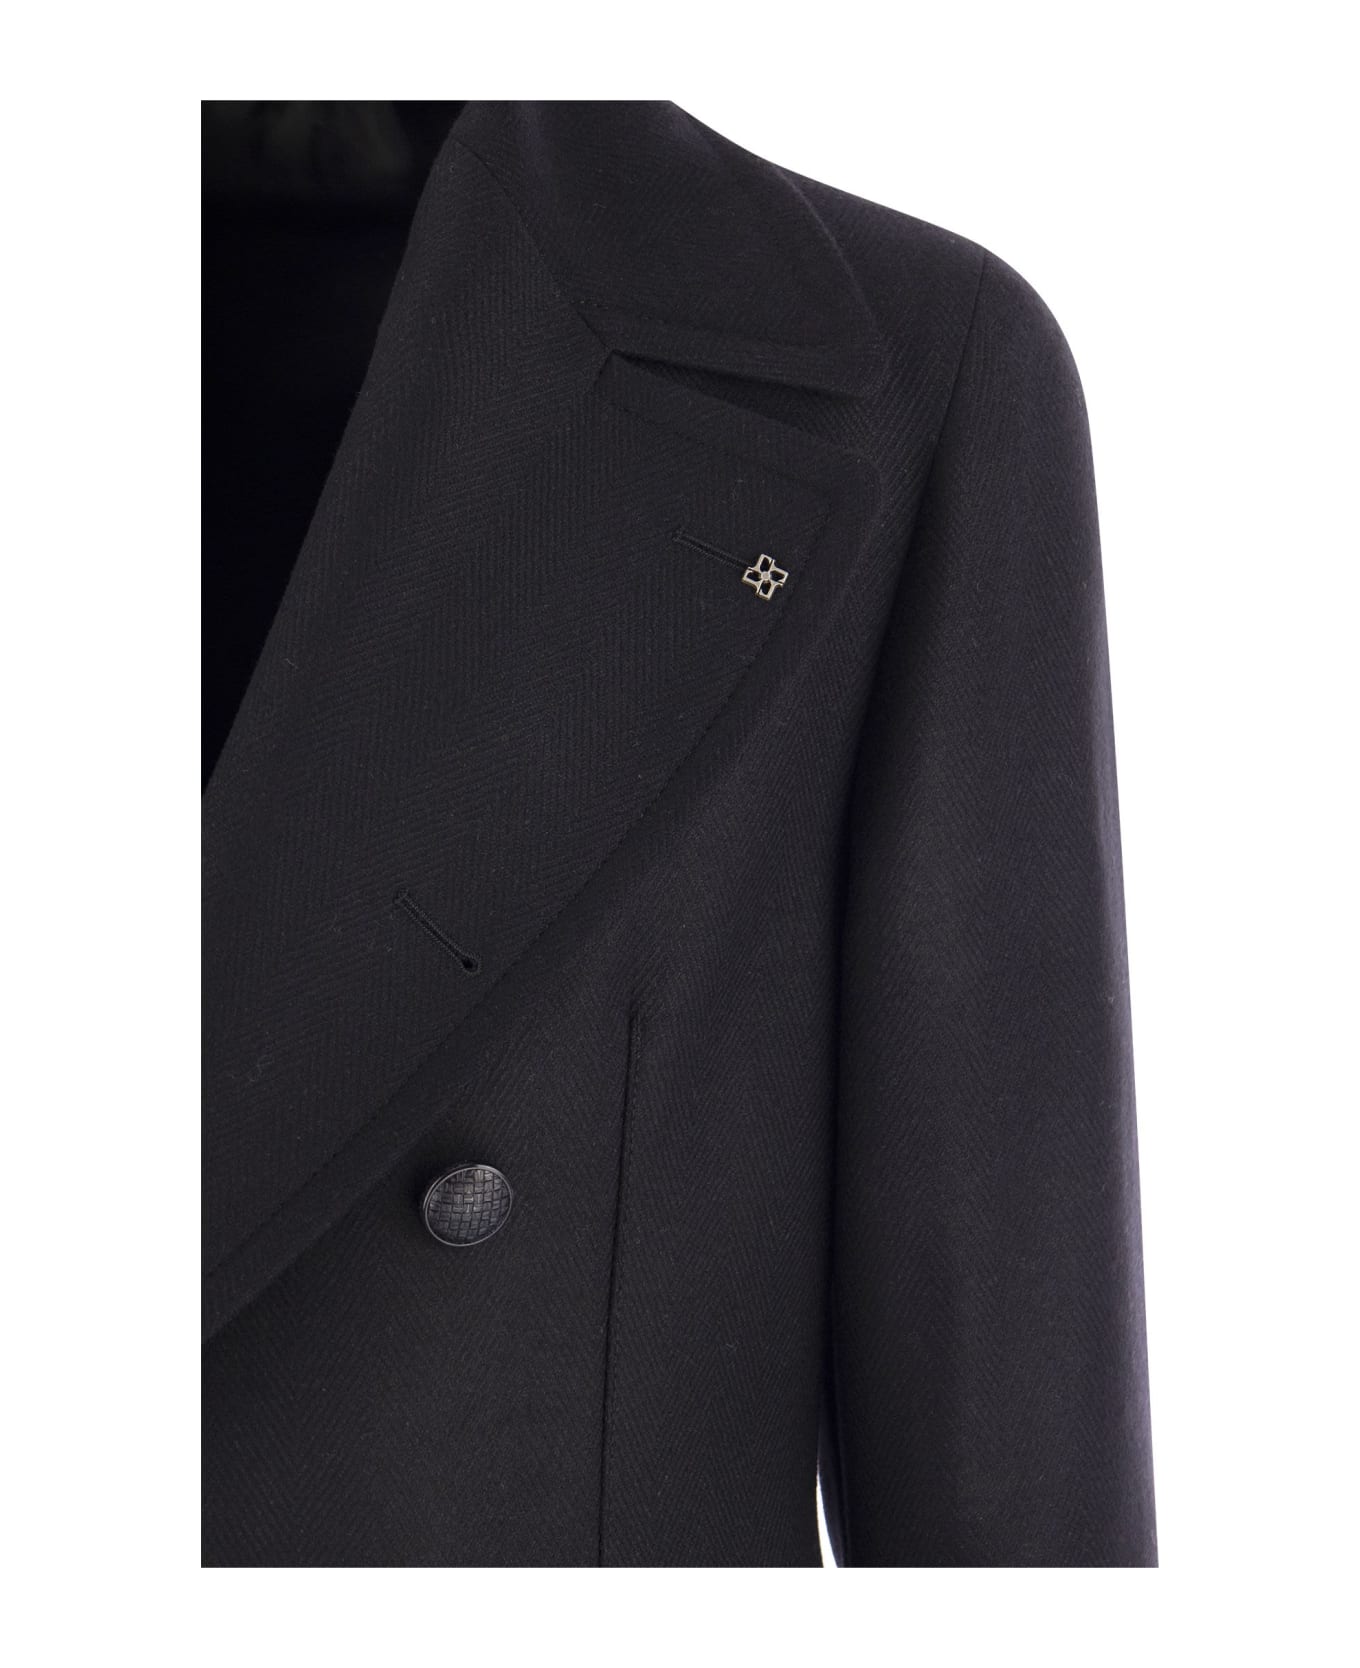 Tagliatore Wool And Cashmere Double-breasted Coat - Black コート